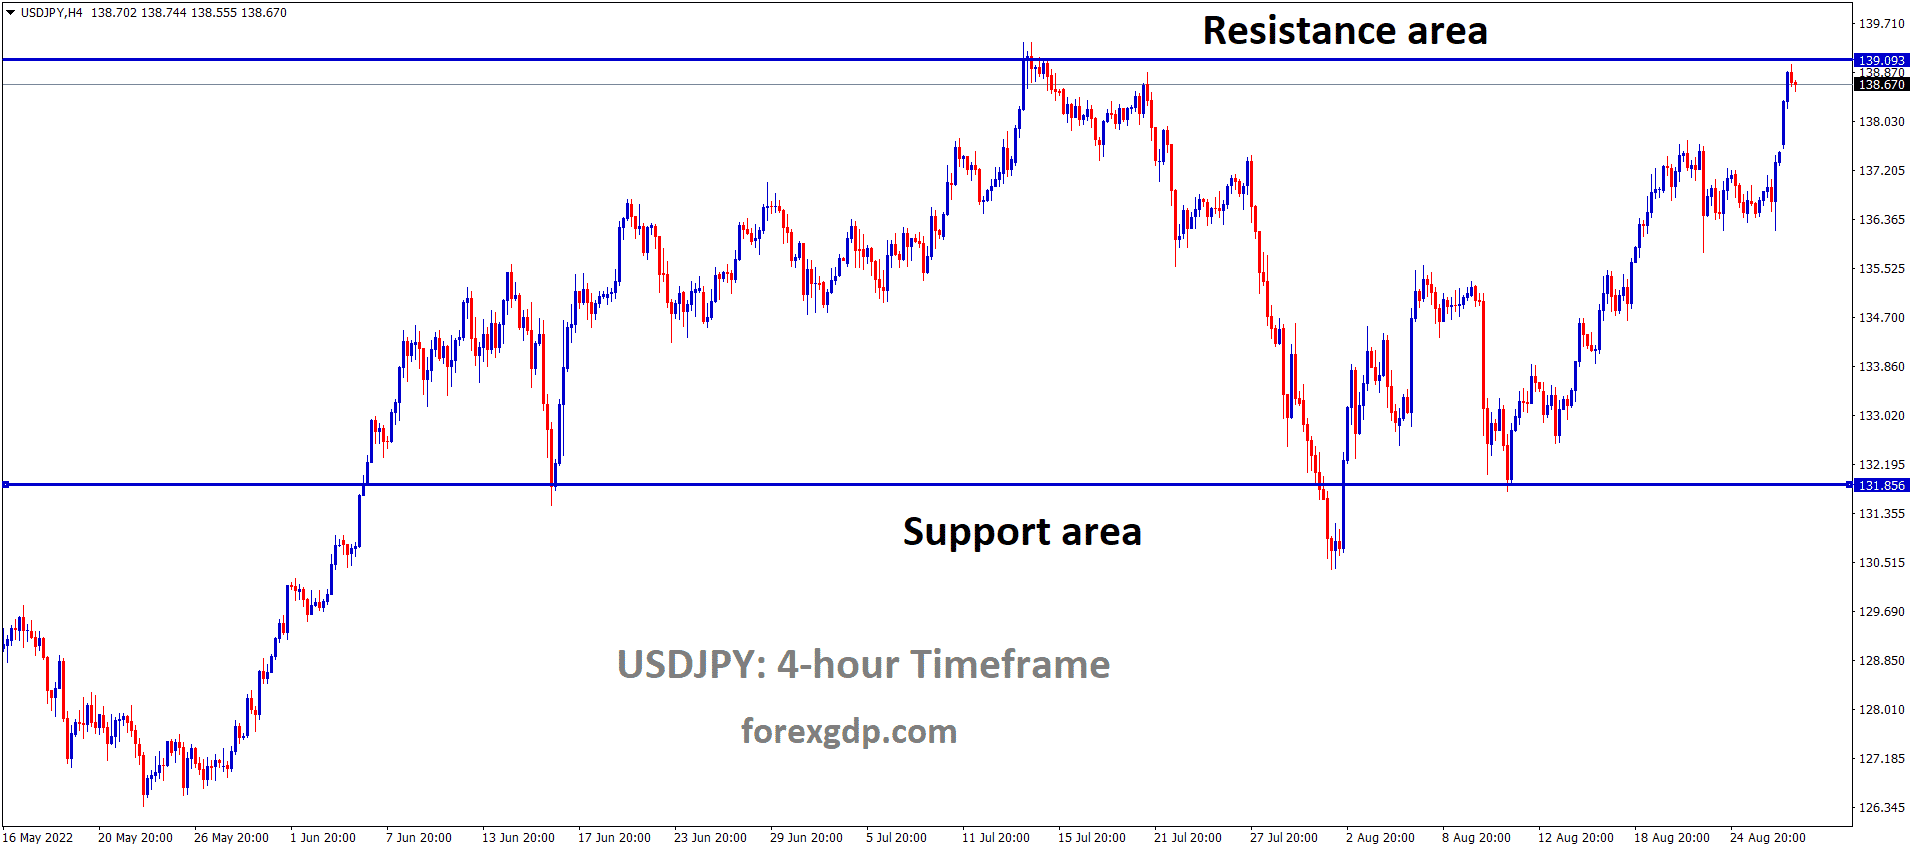 USDJPY is moving in the Box Pattern and the Market has reached the Horizontal resistance area of the pattern